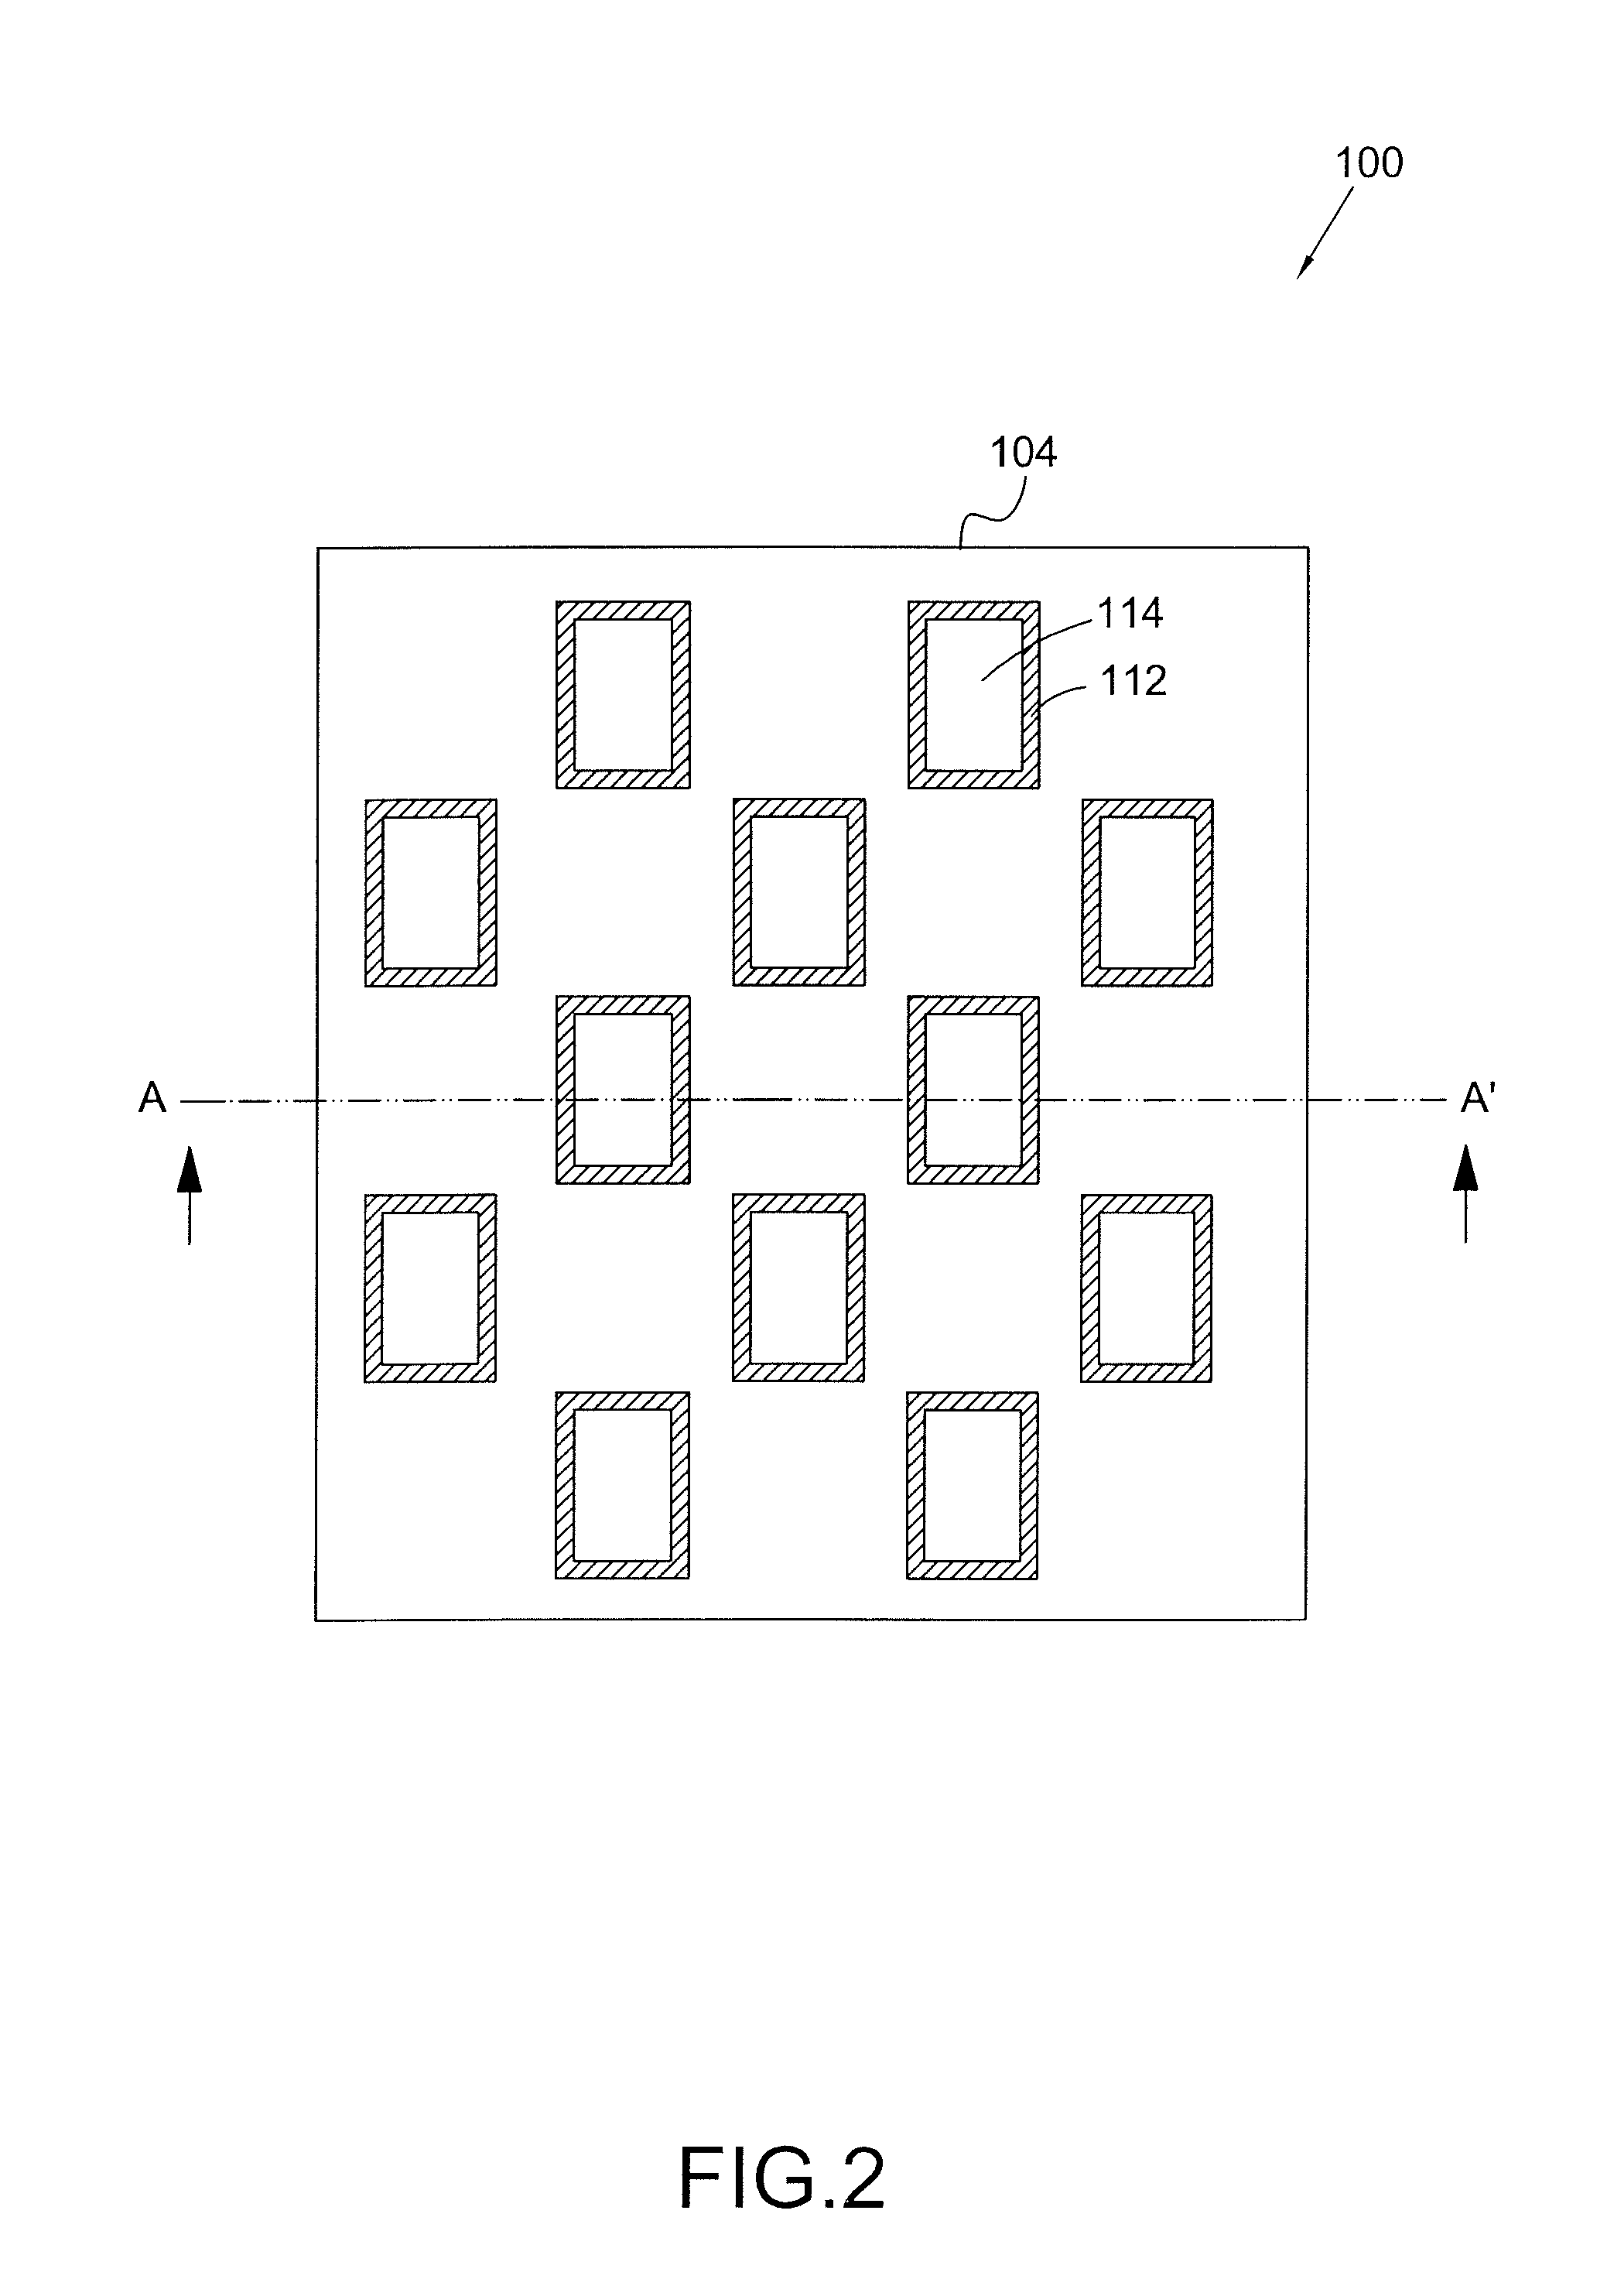 Trench-type semiconductor device structure